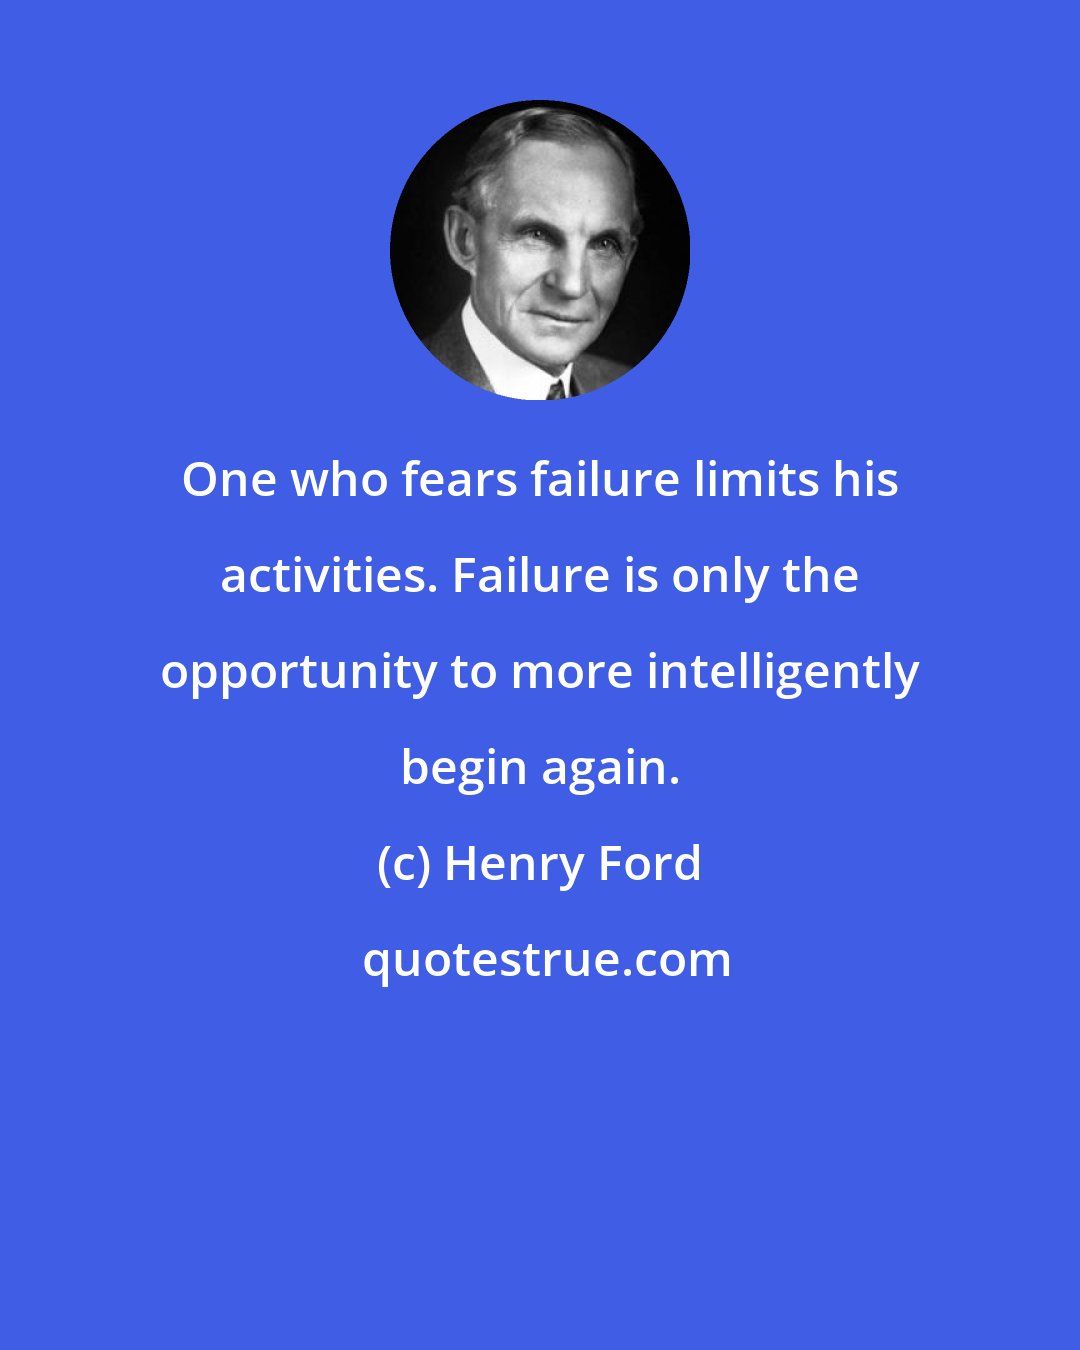 Henry Ford: One who fears failure limits his activities. Failure is only the opportunity to more intelligently begin again.